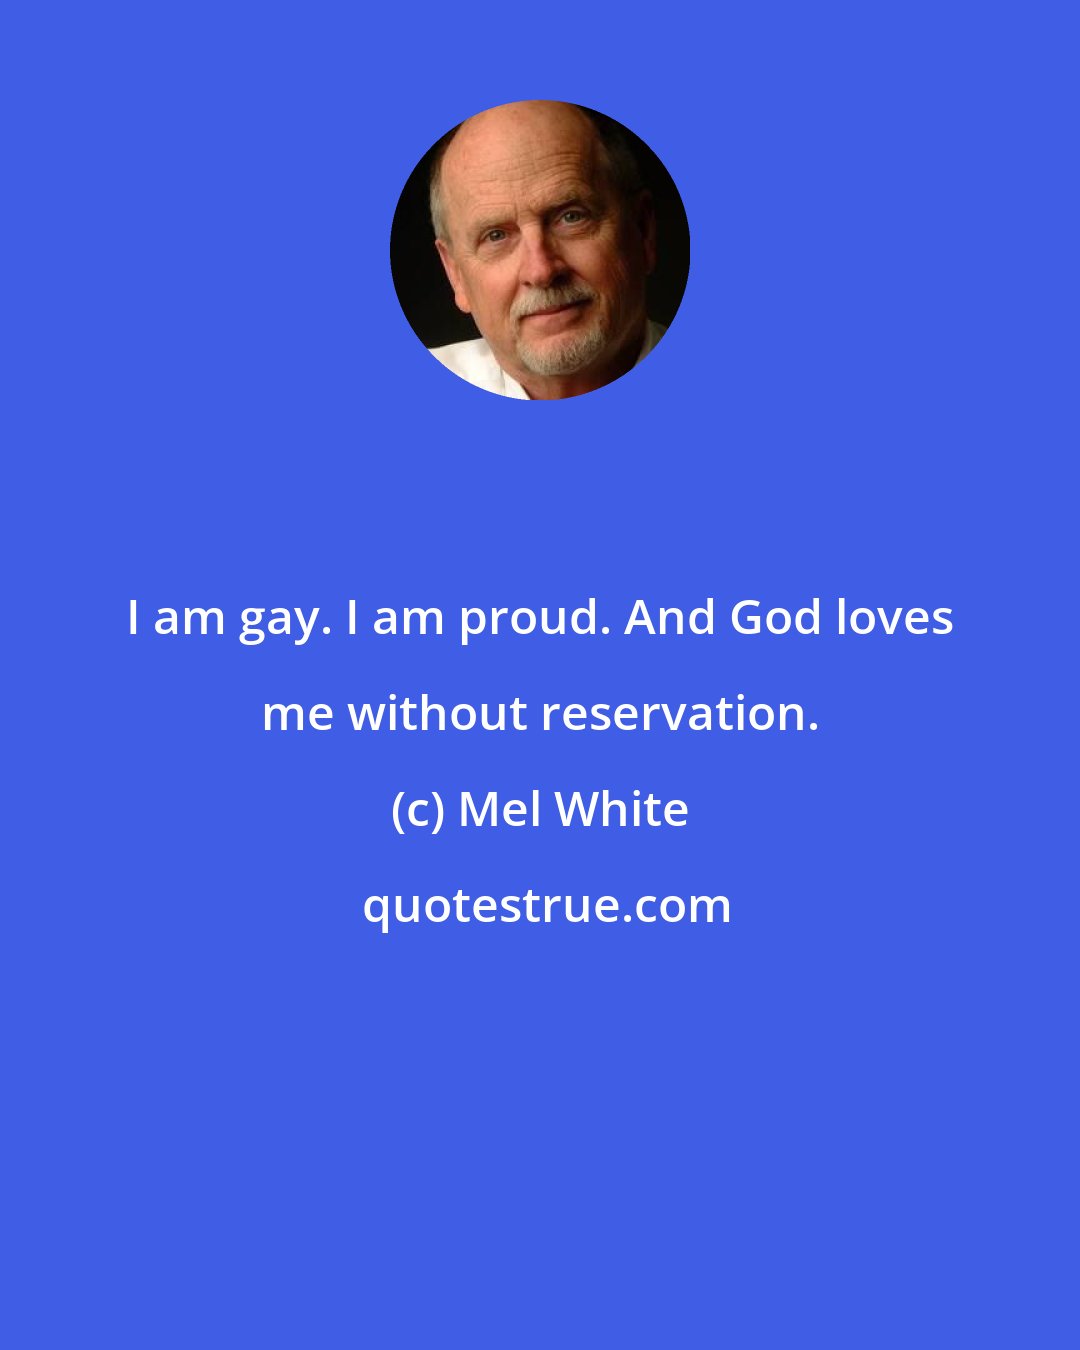 Mel White: I am gay. I am proud. And God loves me without reservation.